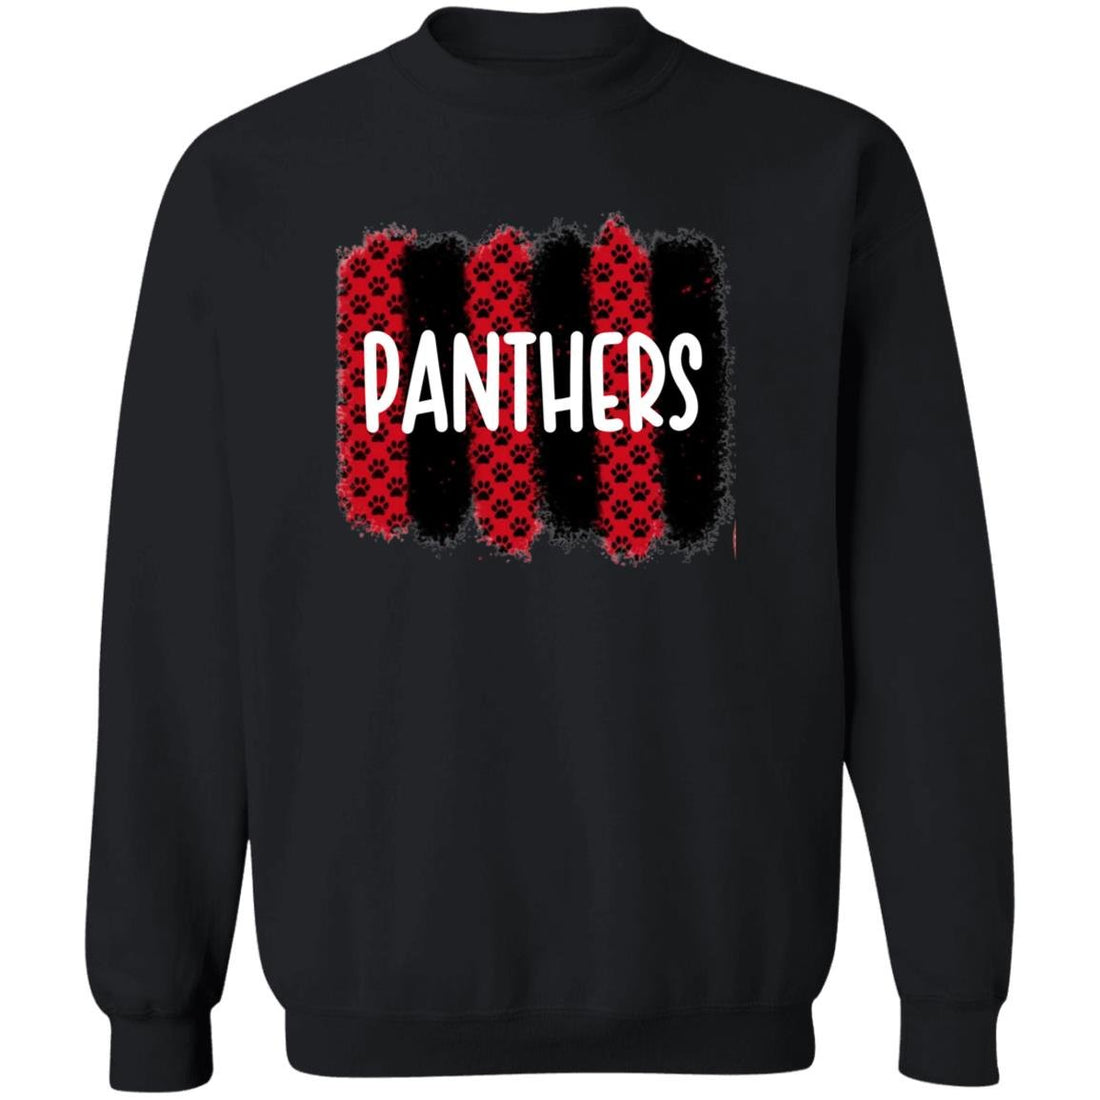 Panther Paw Tracks Crewneck Pullover Sweatshirt - Sweatshirts - Positively Sassy - Panther Paw Tracks Crewneck Pullover Sweatshirt